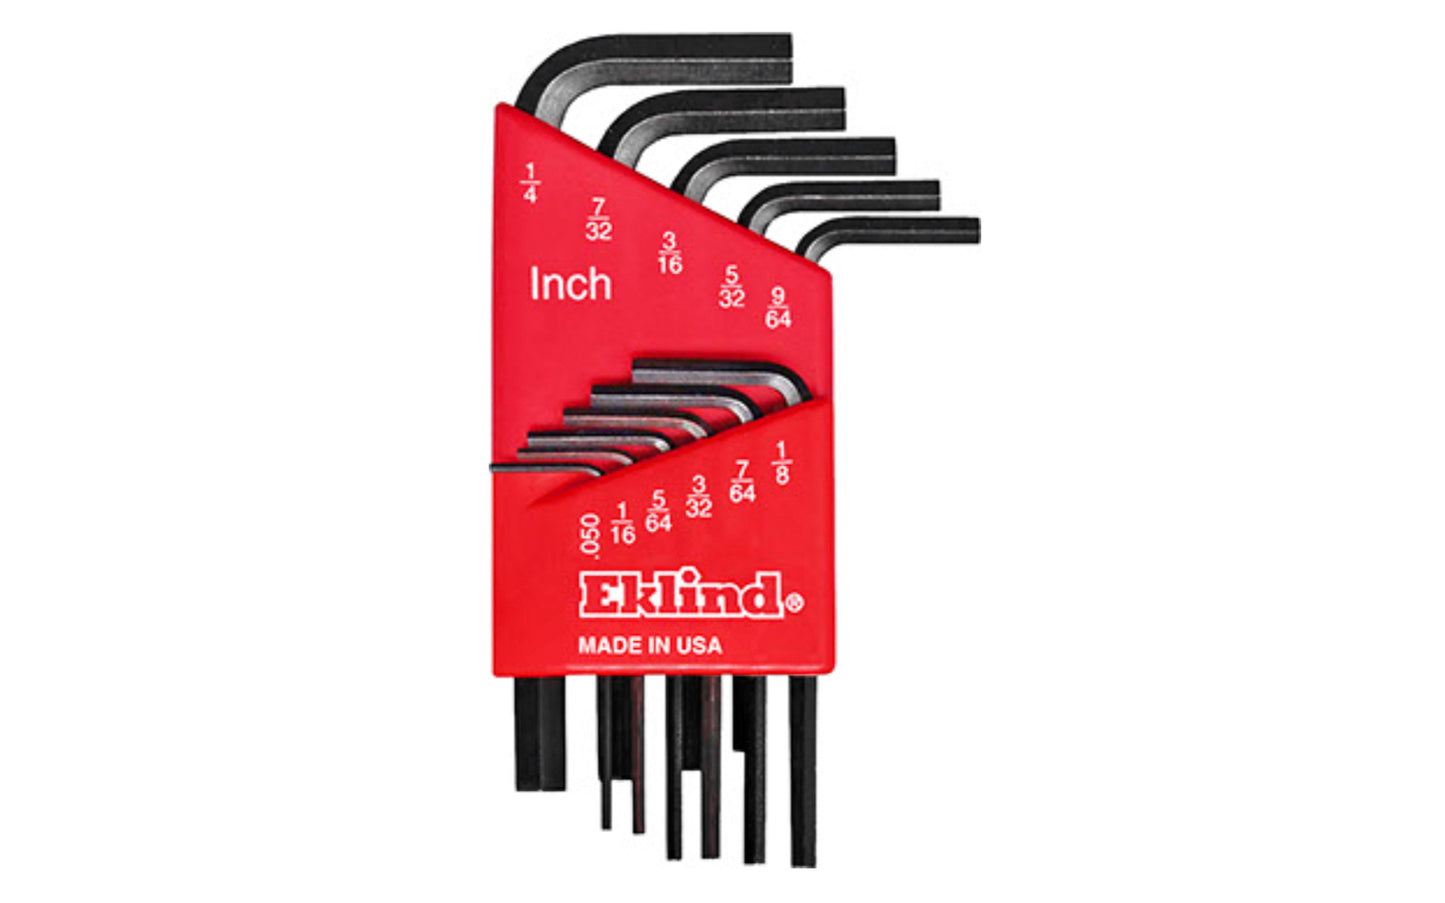 This Eklind 11-PC Hex-L Wrench Key SAE Set. .050", 1/16", 5/64", 3/32", 7/64",  1/8", 9/64", 5/32", 3/16", 7/32", & 1/4" sizes. Allen wrench set is hardened, tempered & finished with Eklind black finish to resist rust. Plastic holder firmly retains each key. Eklind model 10111. Made in USA.